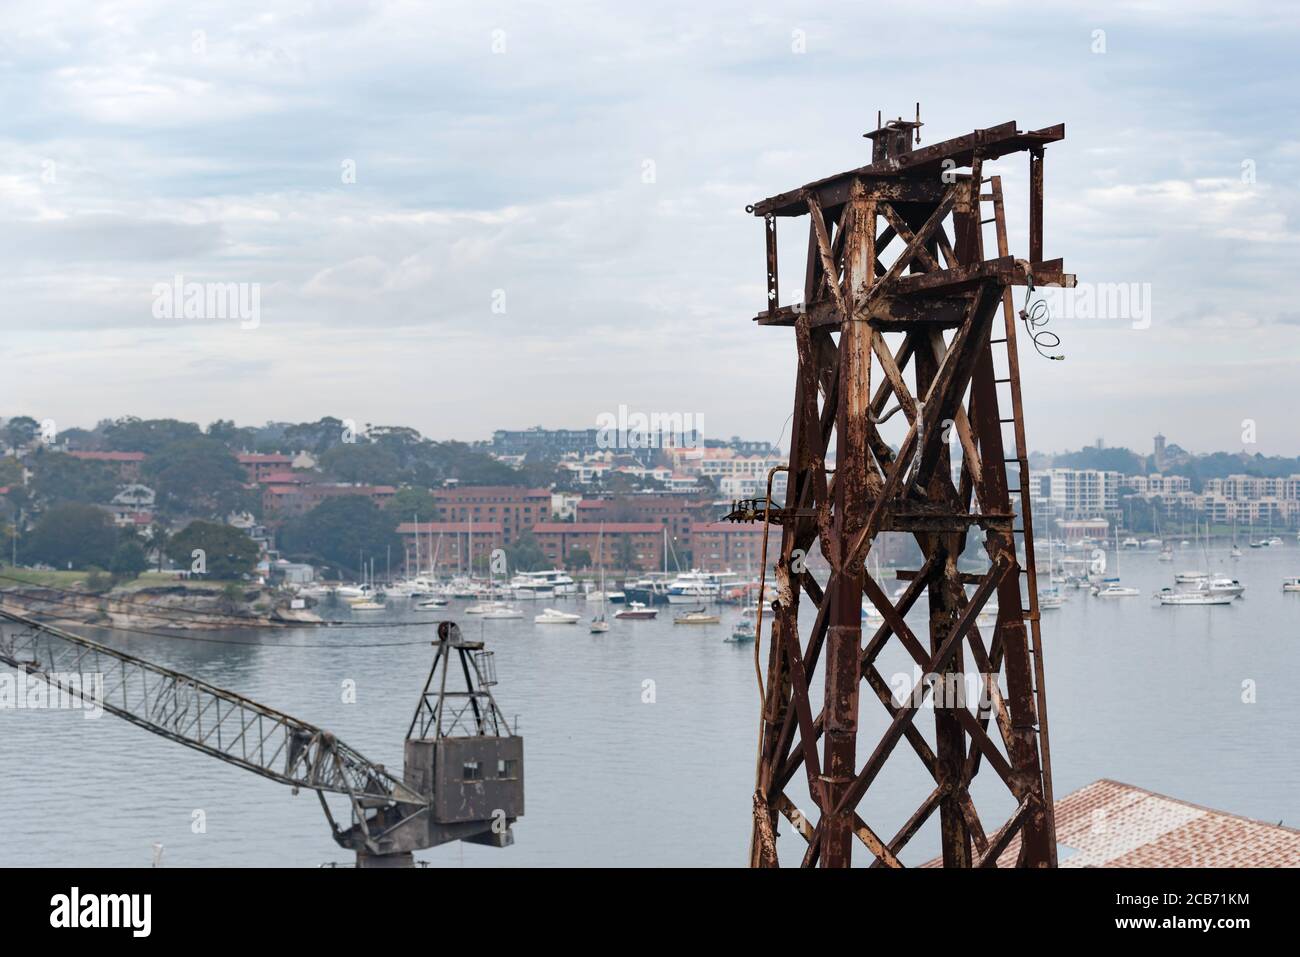 Two old and disused dockyard cranes on Cockatoo Island Dockyard in Sydney Harbour, New South Wales, Australia Stock Photo